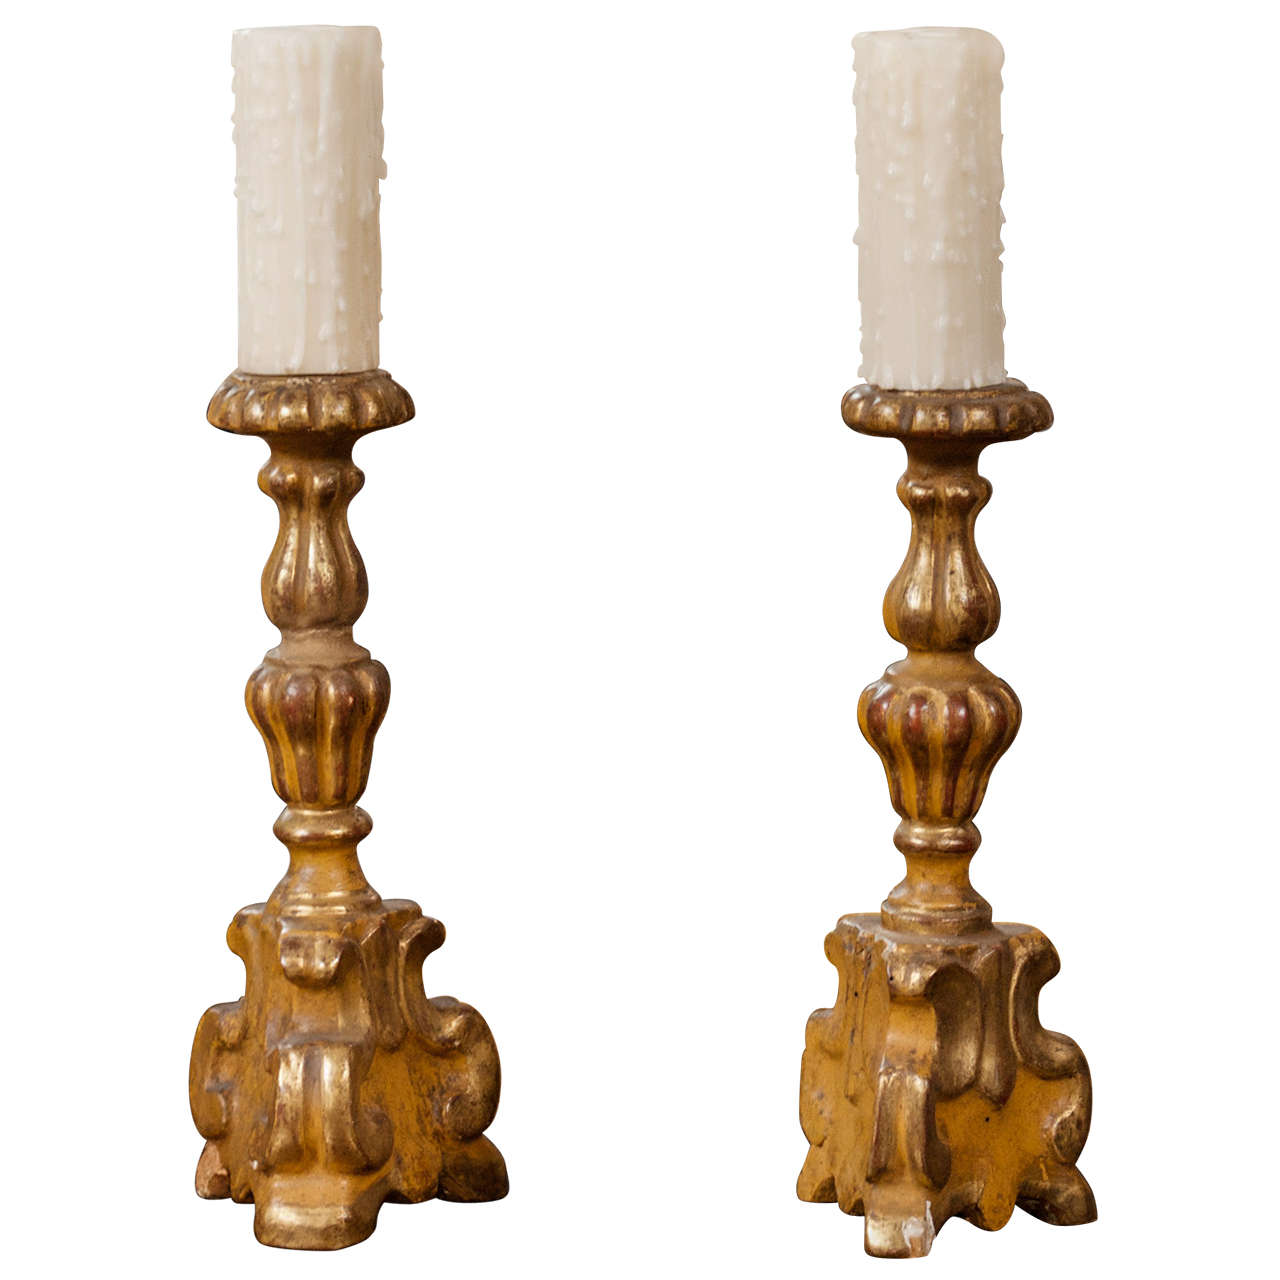 Pair of Small-Scale Carved Giltwood Candlesticks, French, circa 1780 For Sale